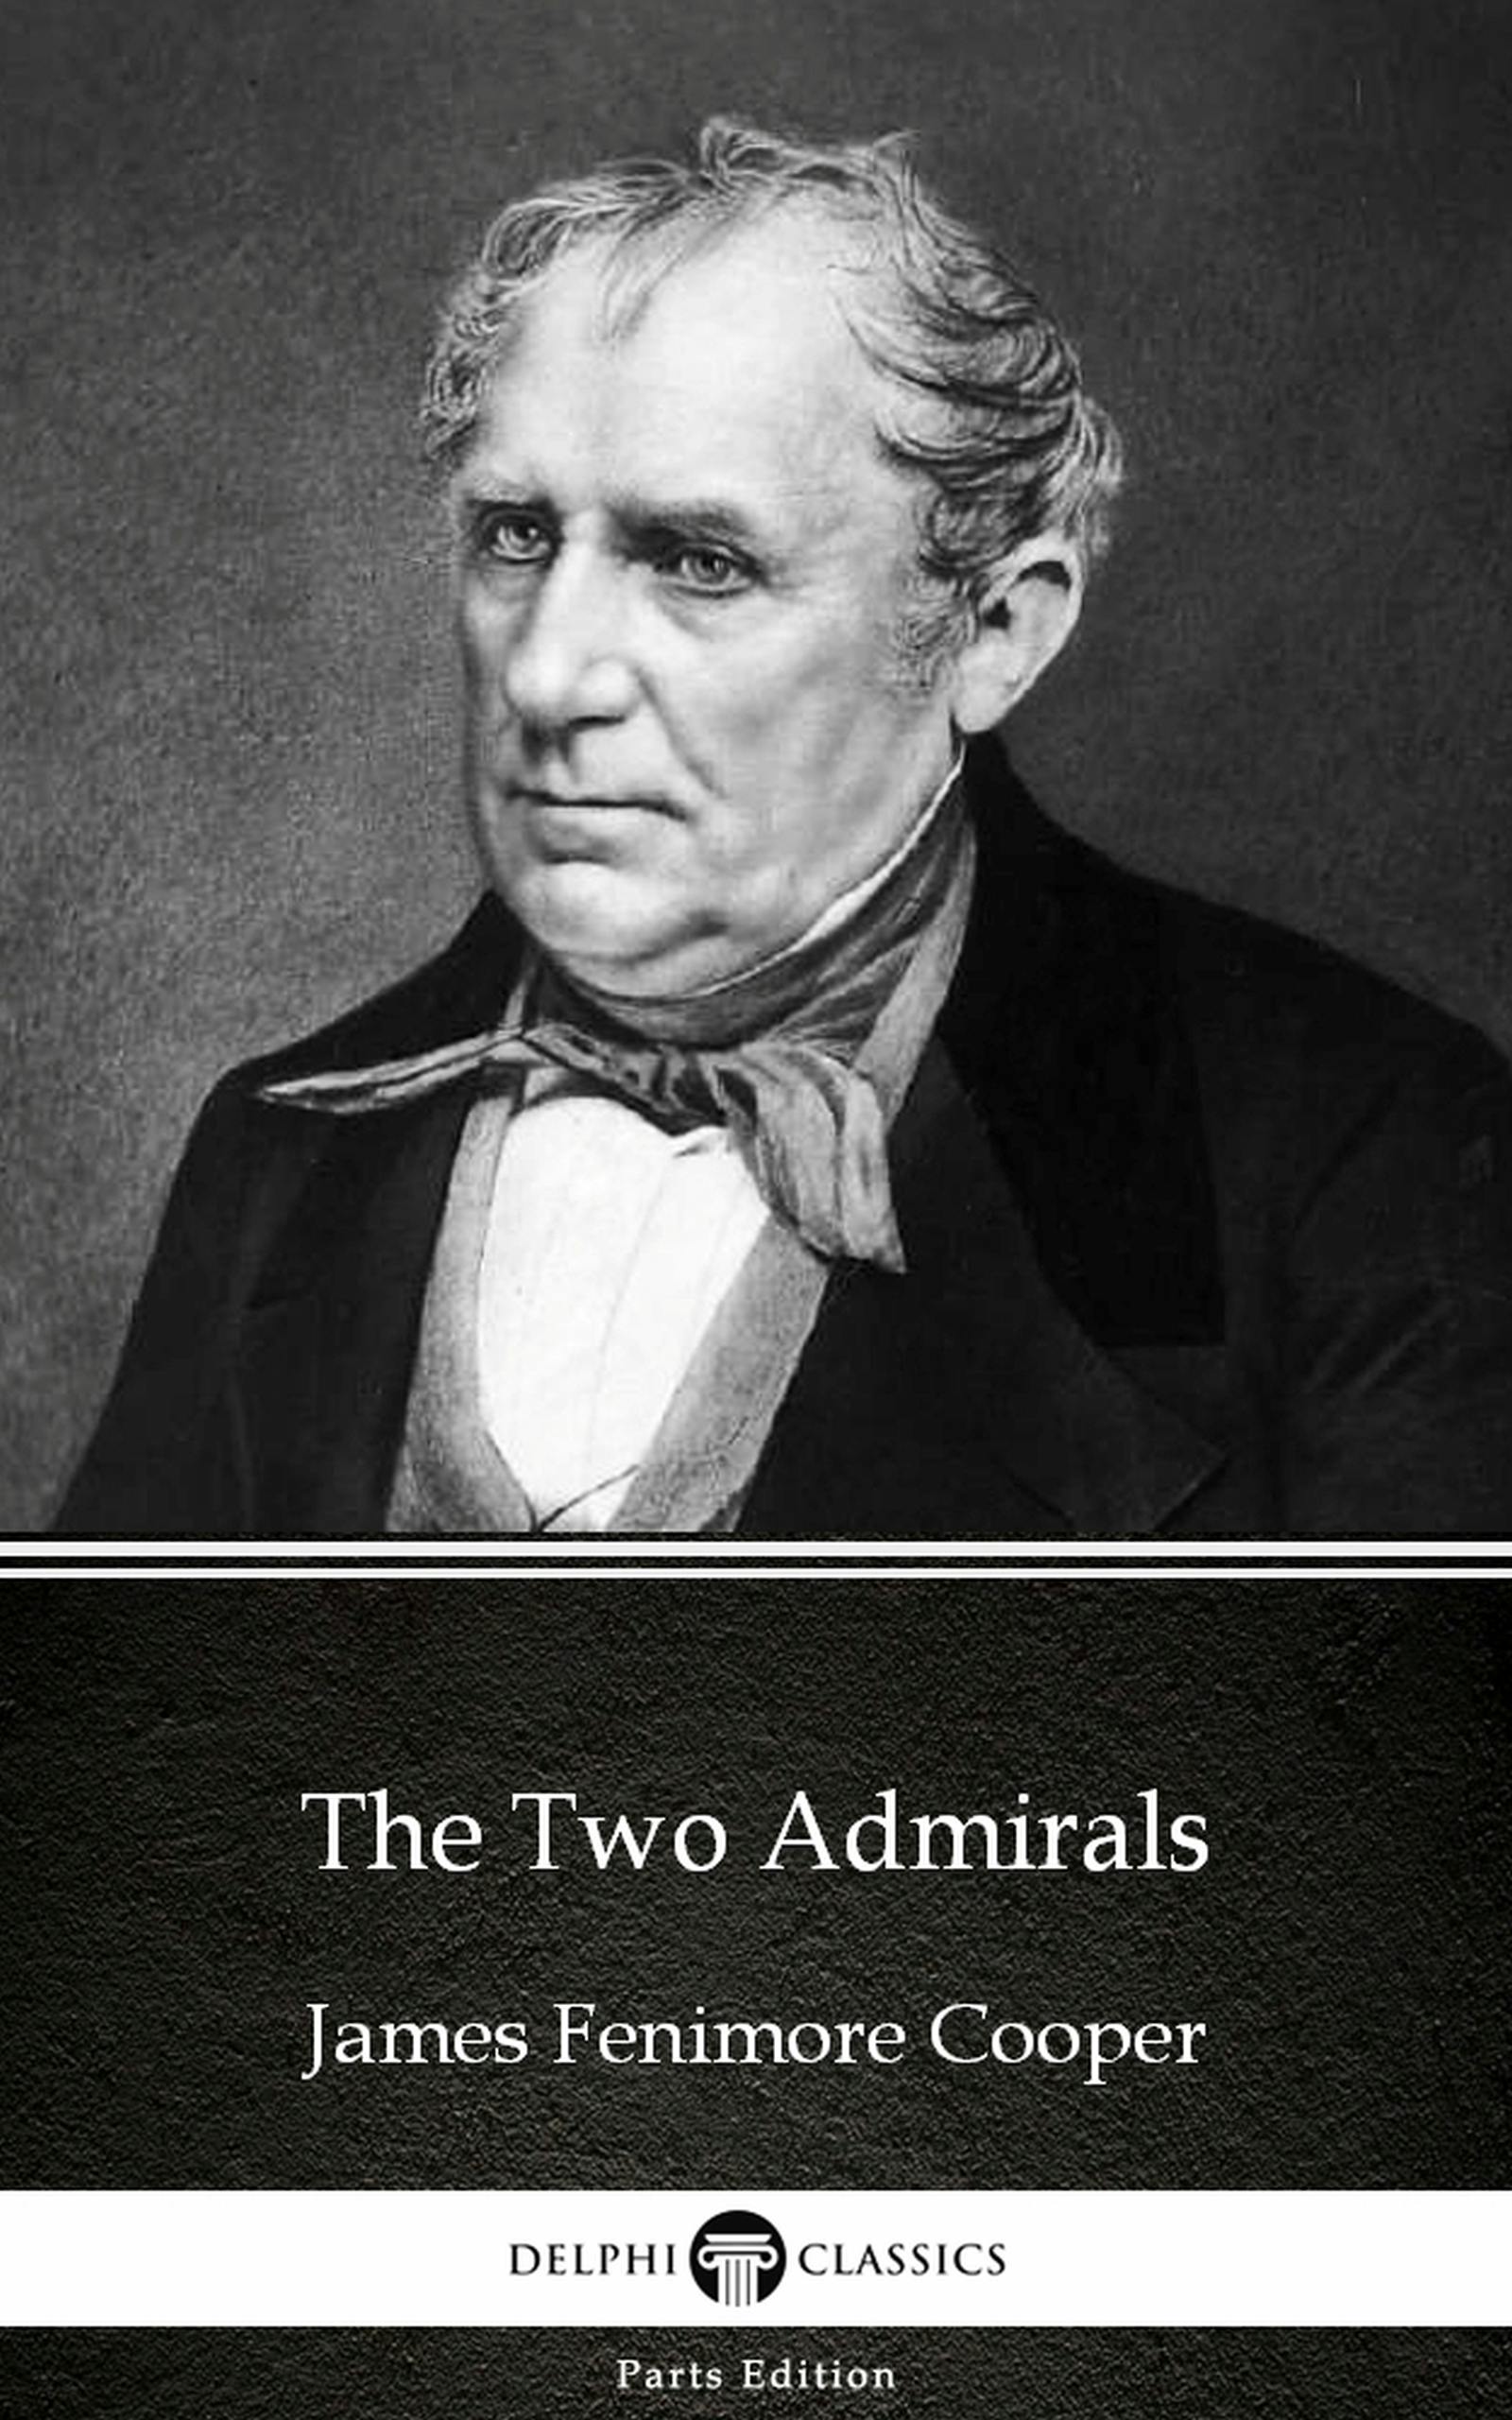 The Two Admirals by James Fenimore Cooper - Delphi Classics (Illustrated) - James Fenimore Cooper